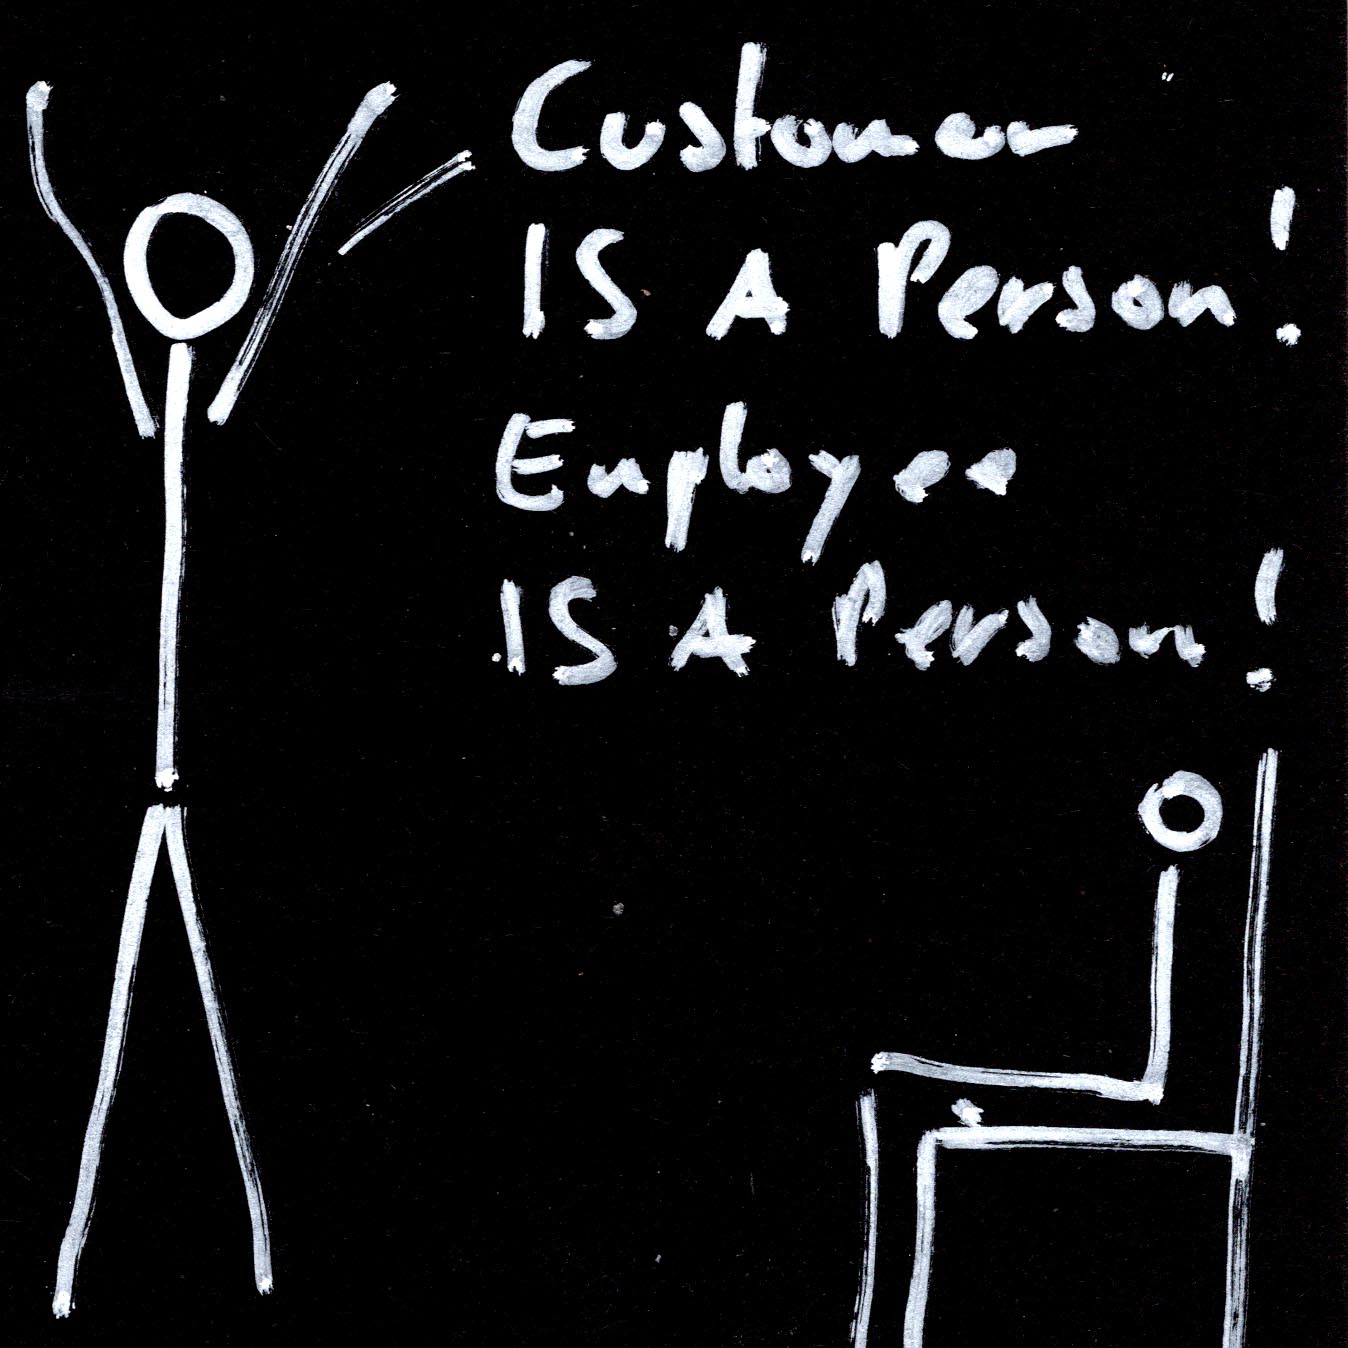 Customer IS-A Person! Employee IS-A Person!